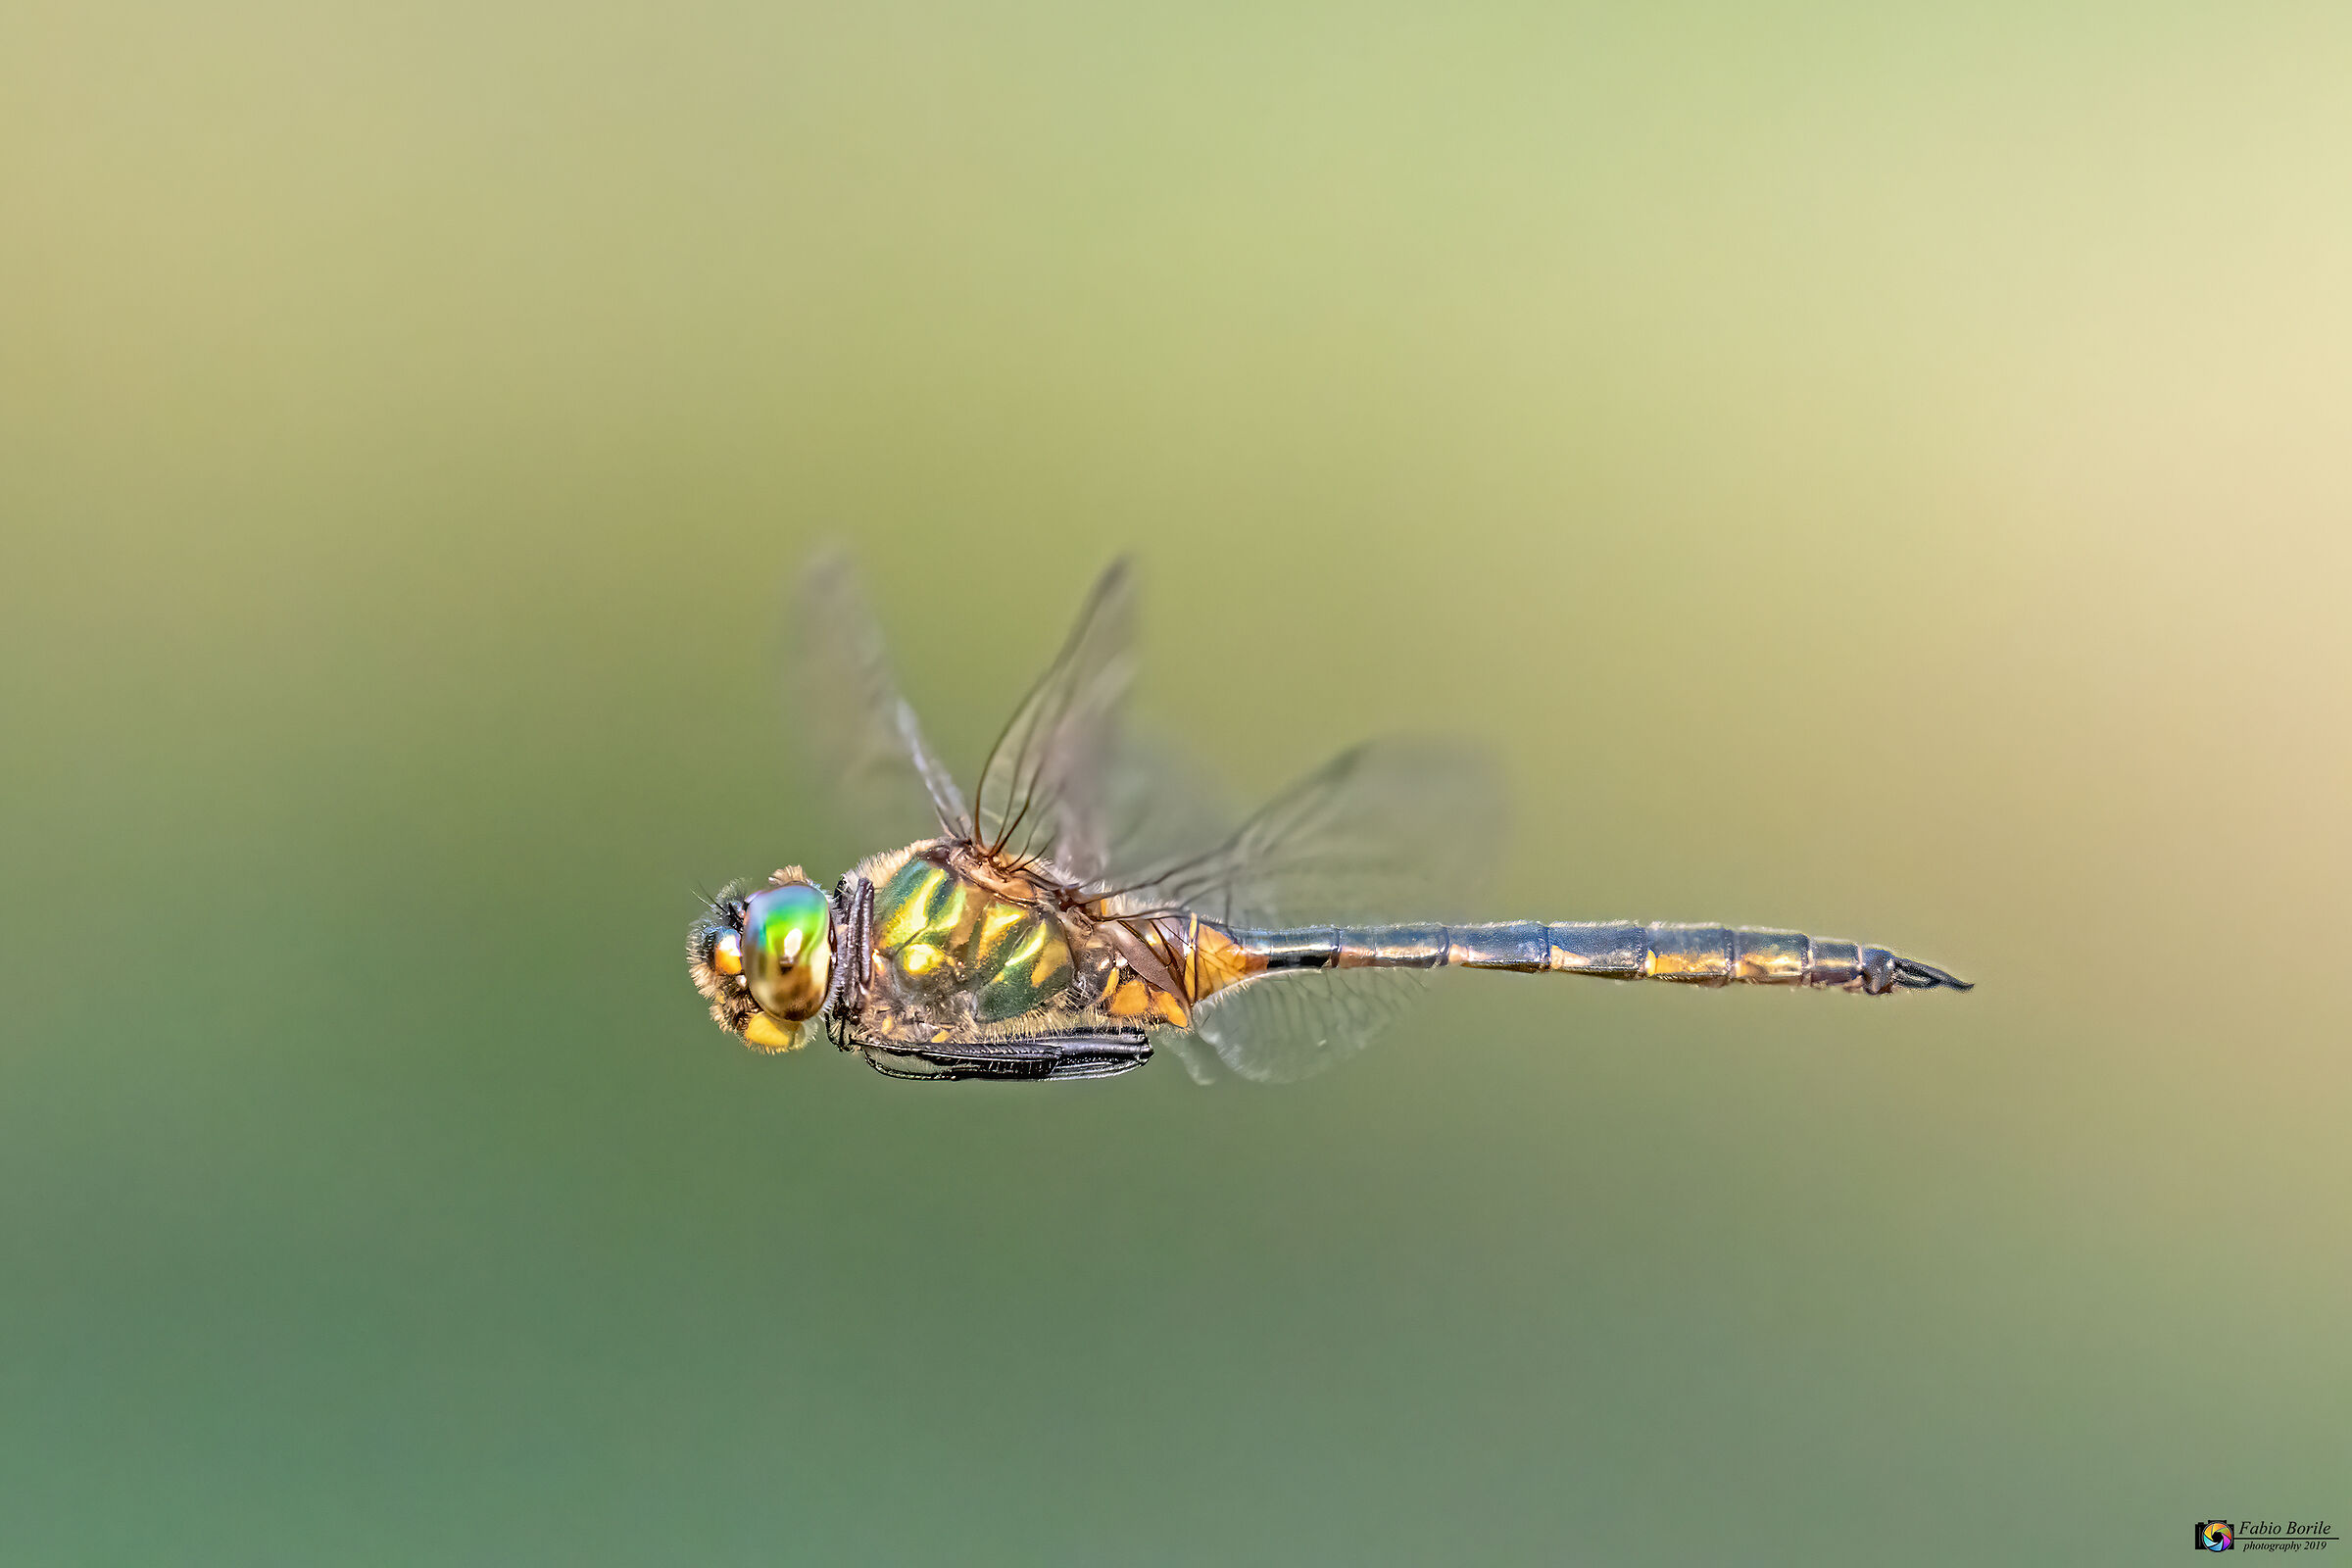 Fly dragonfly...